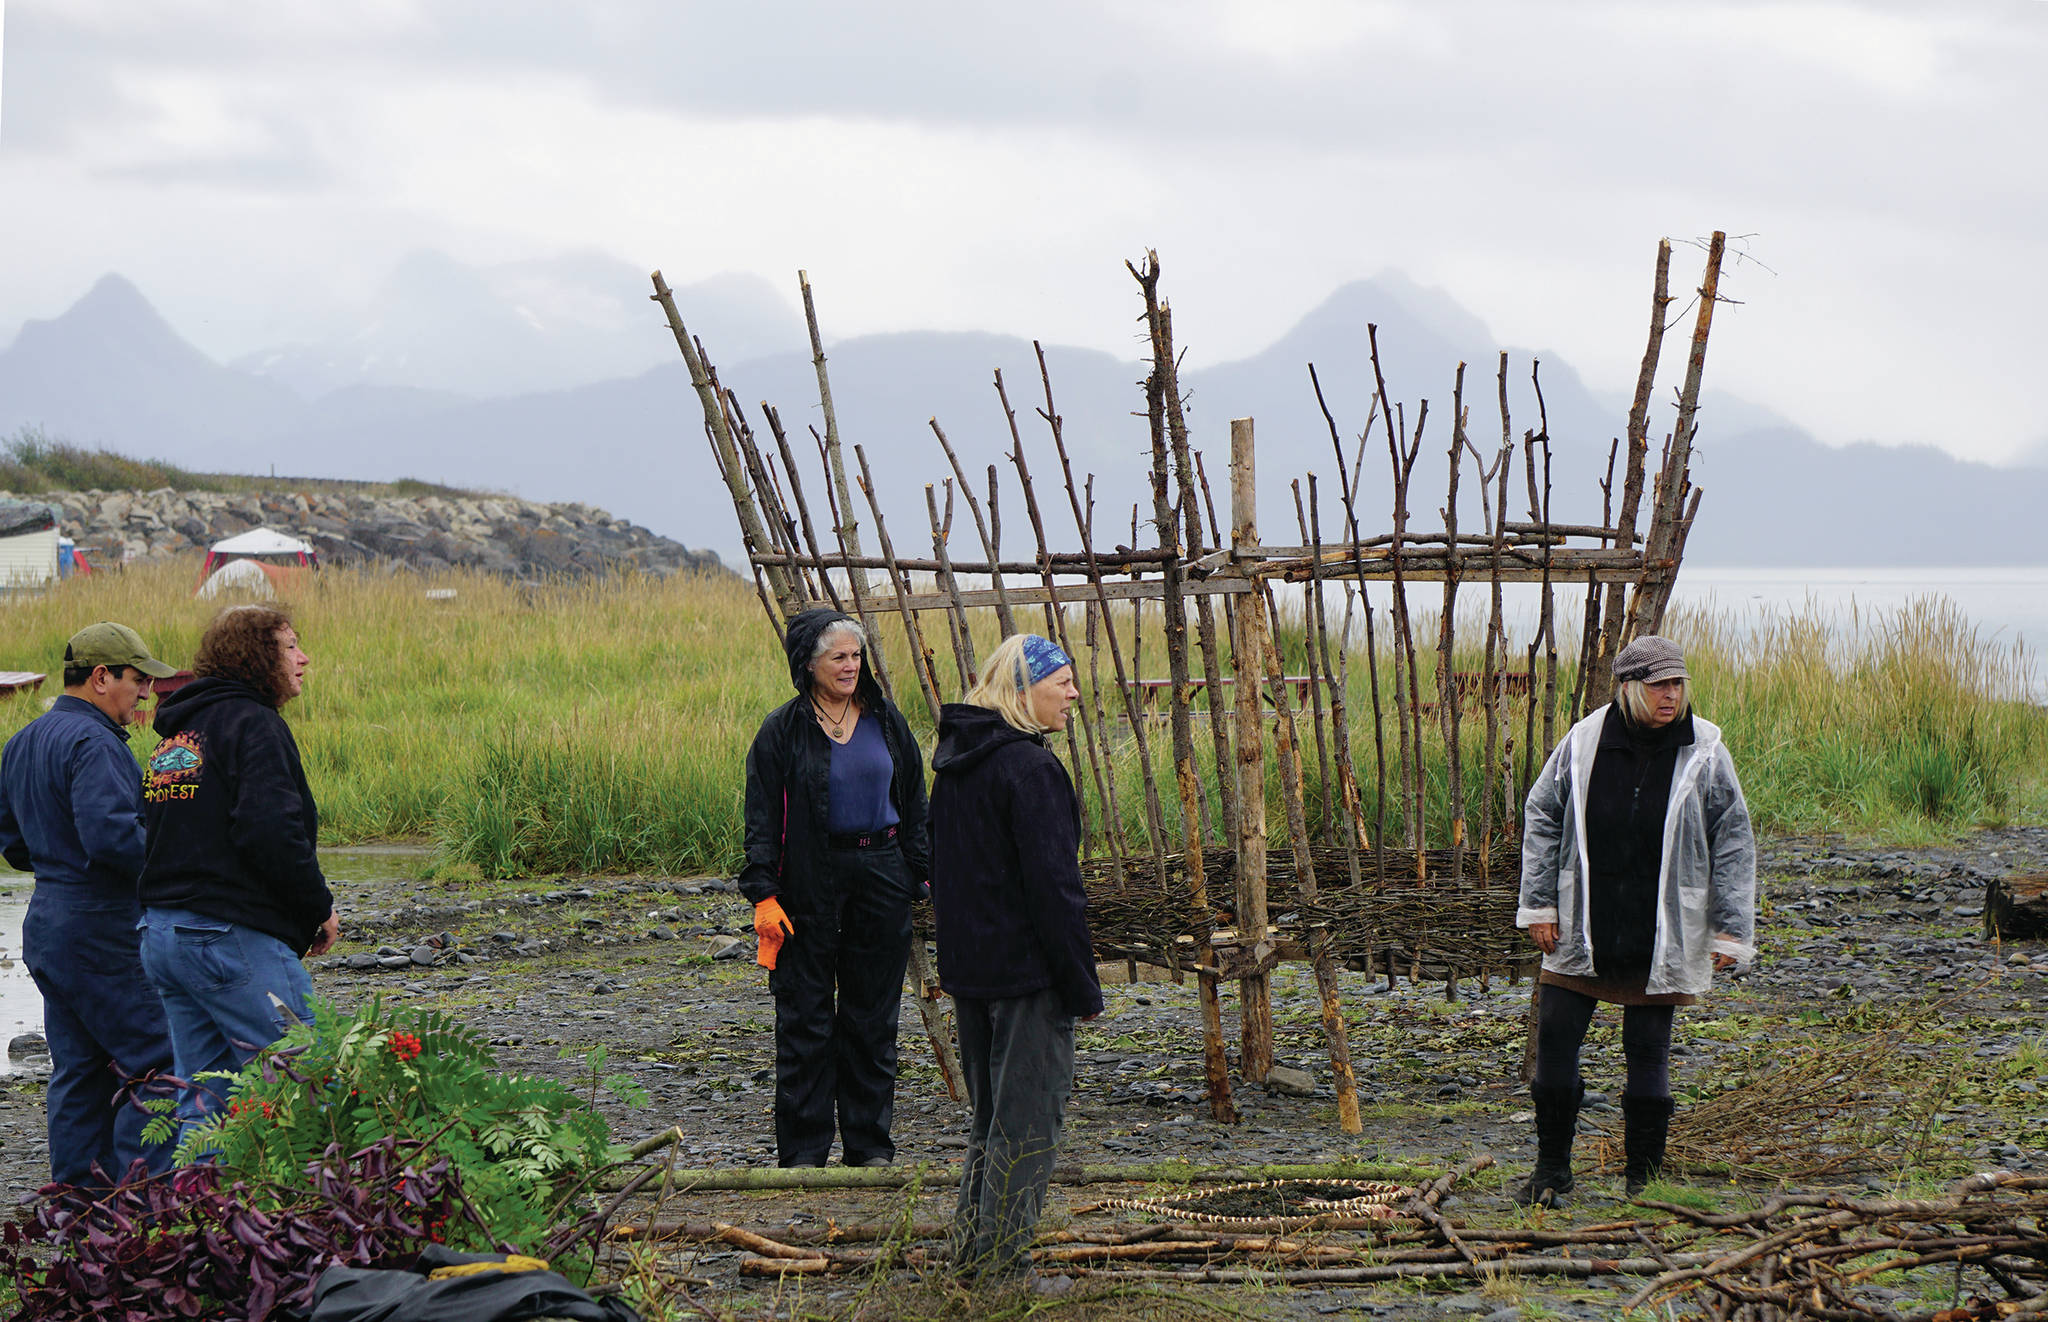 Burning Basket facilitator Mavis Muller, right, guides volunteers in building the 16th annual Burning Basket, Radiate, on Monday, Sept. 9, 2019, at Mariner Park on the Homer Spit in Homer, Alaska. (Photo by Michael Armstrong/Homer News)